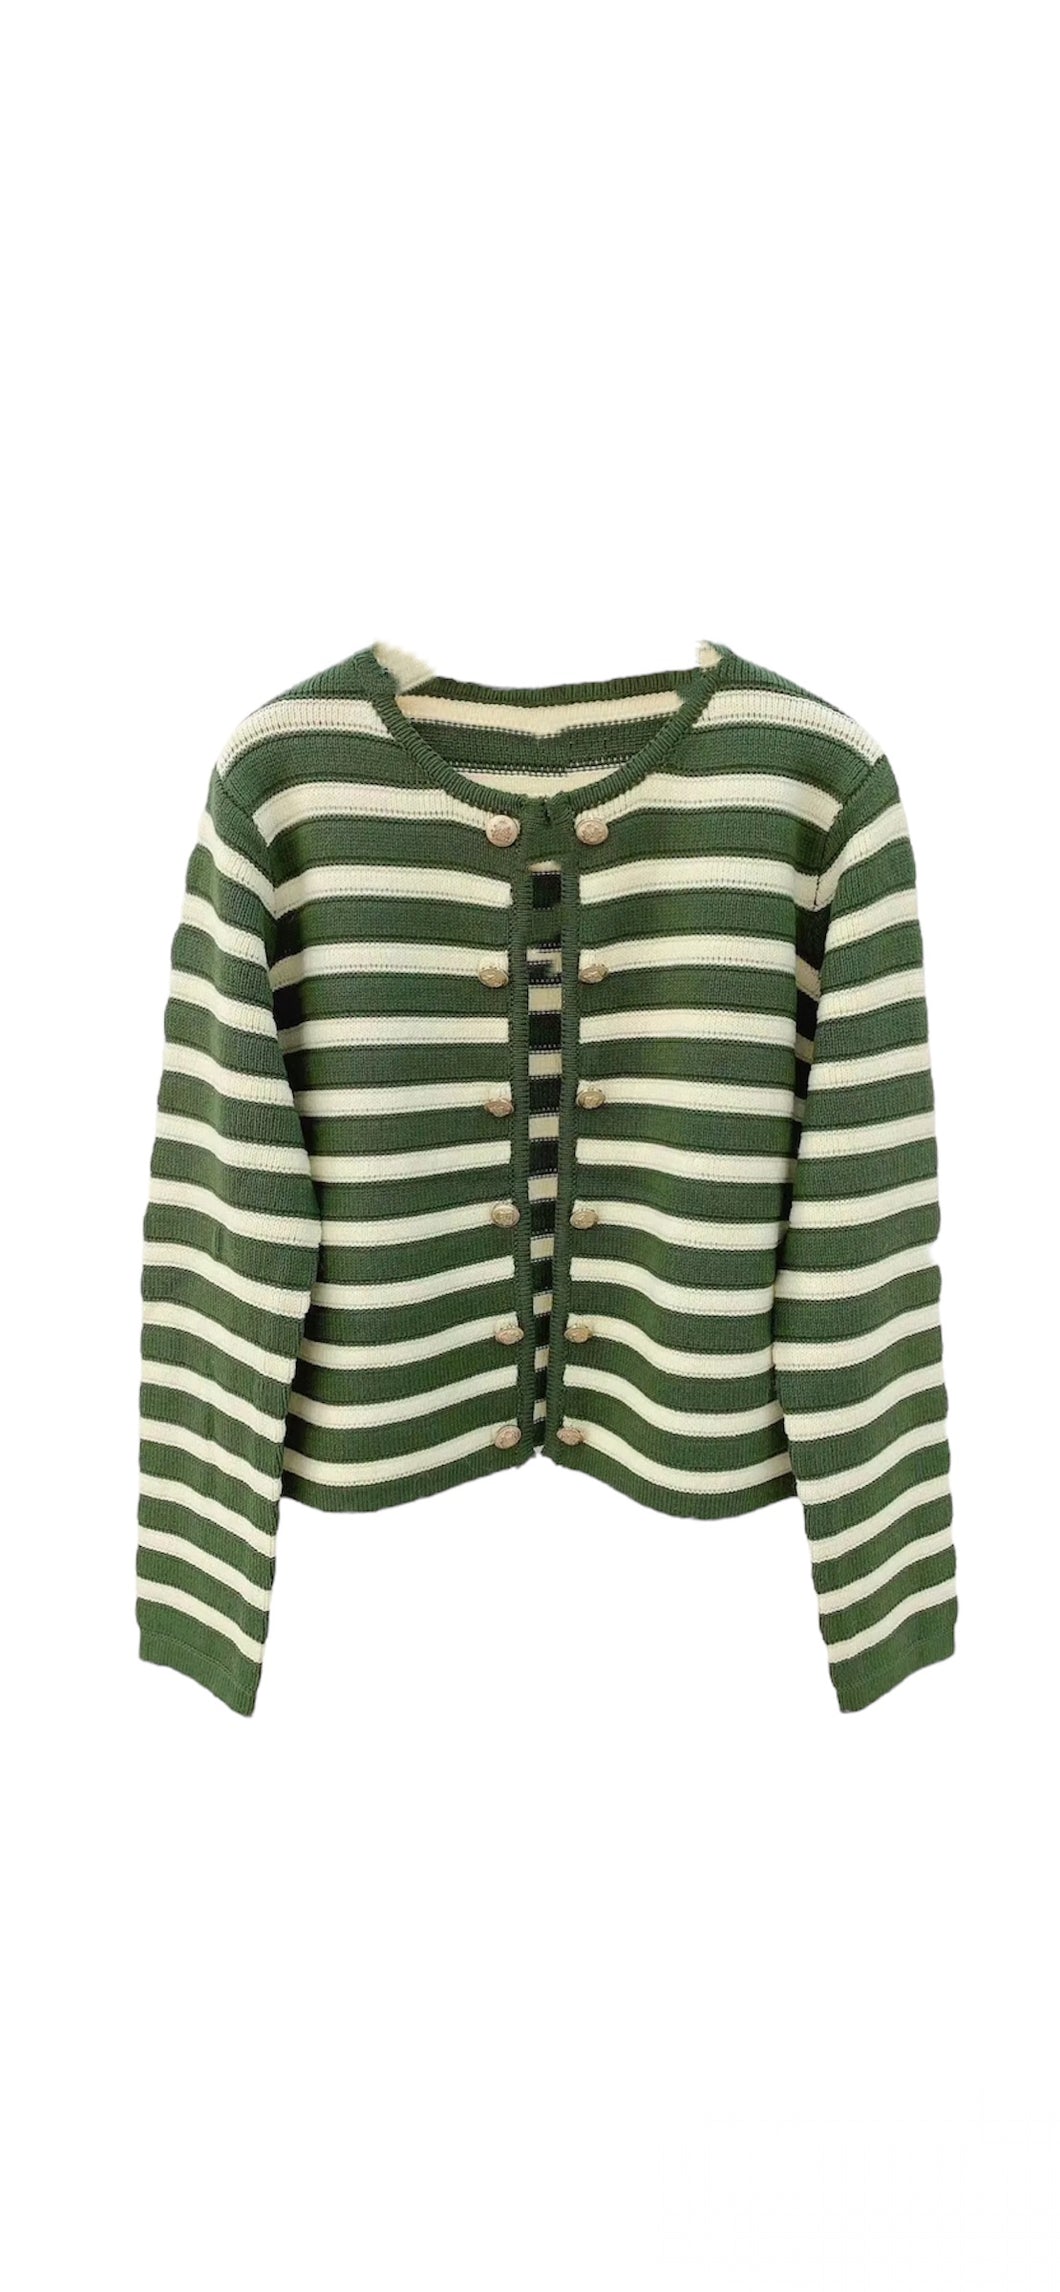 Yune Stripes Sweater - Different Colors